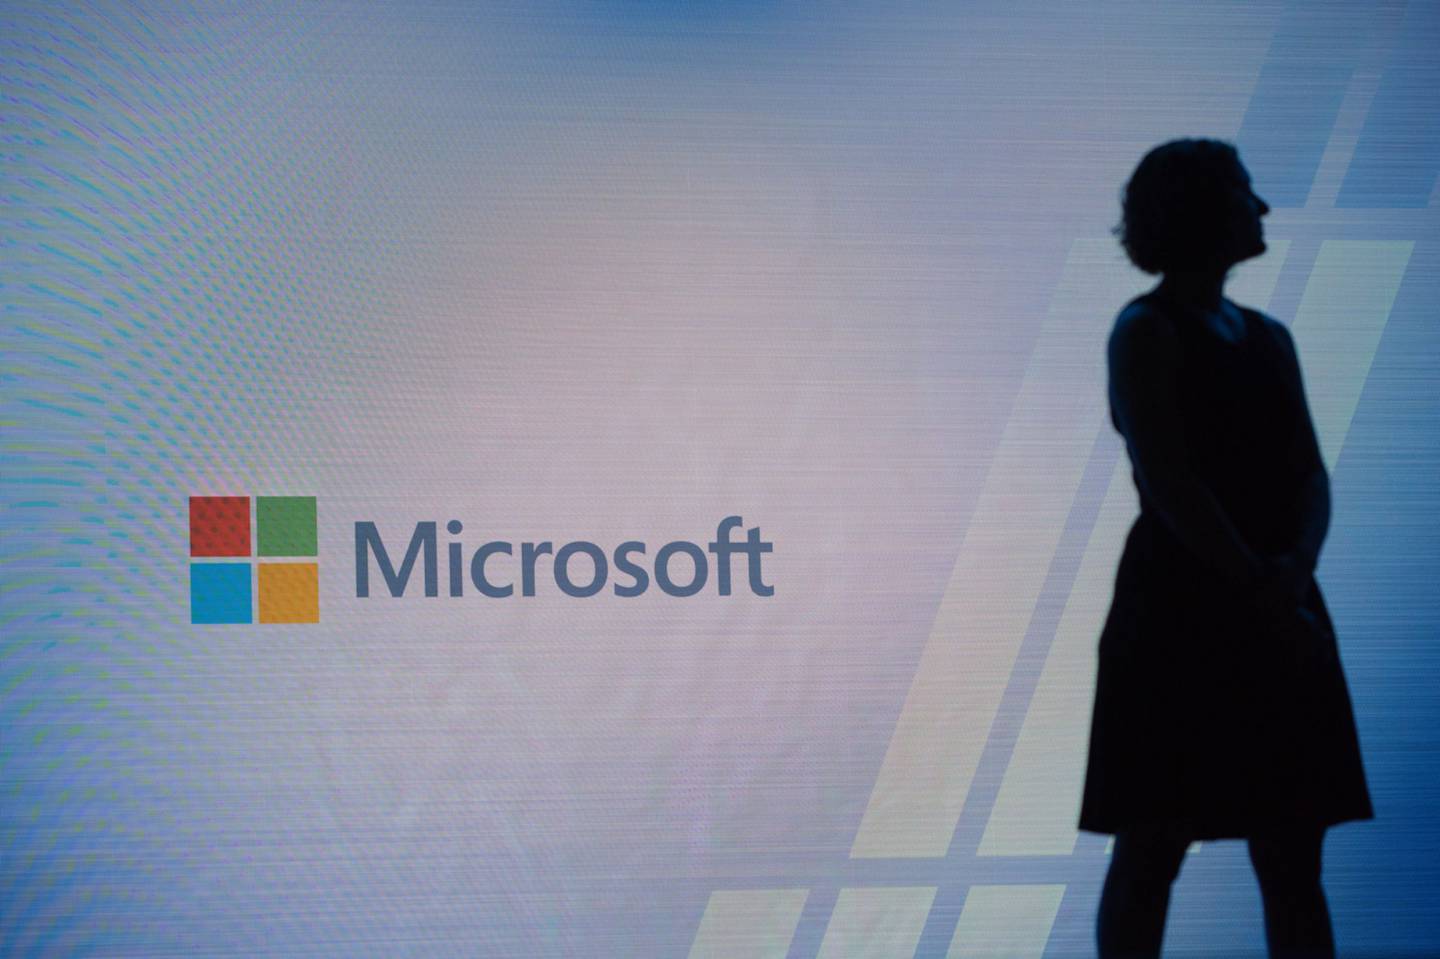 Microsoft is at pay parity when comparing women and people of color doing equal work with men or White workers.